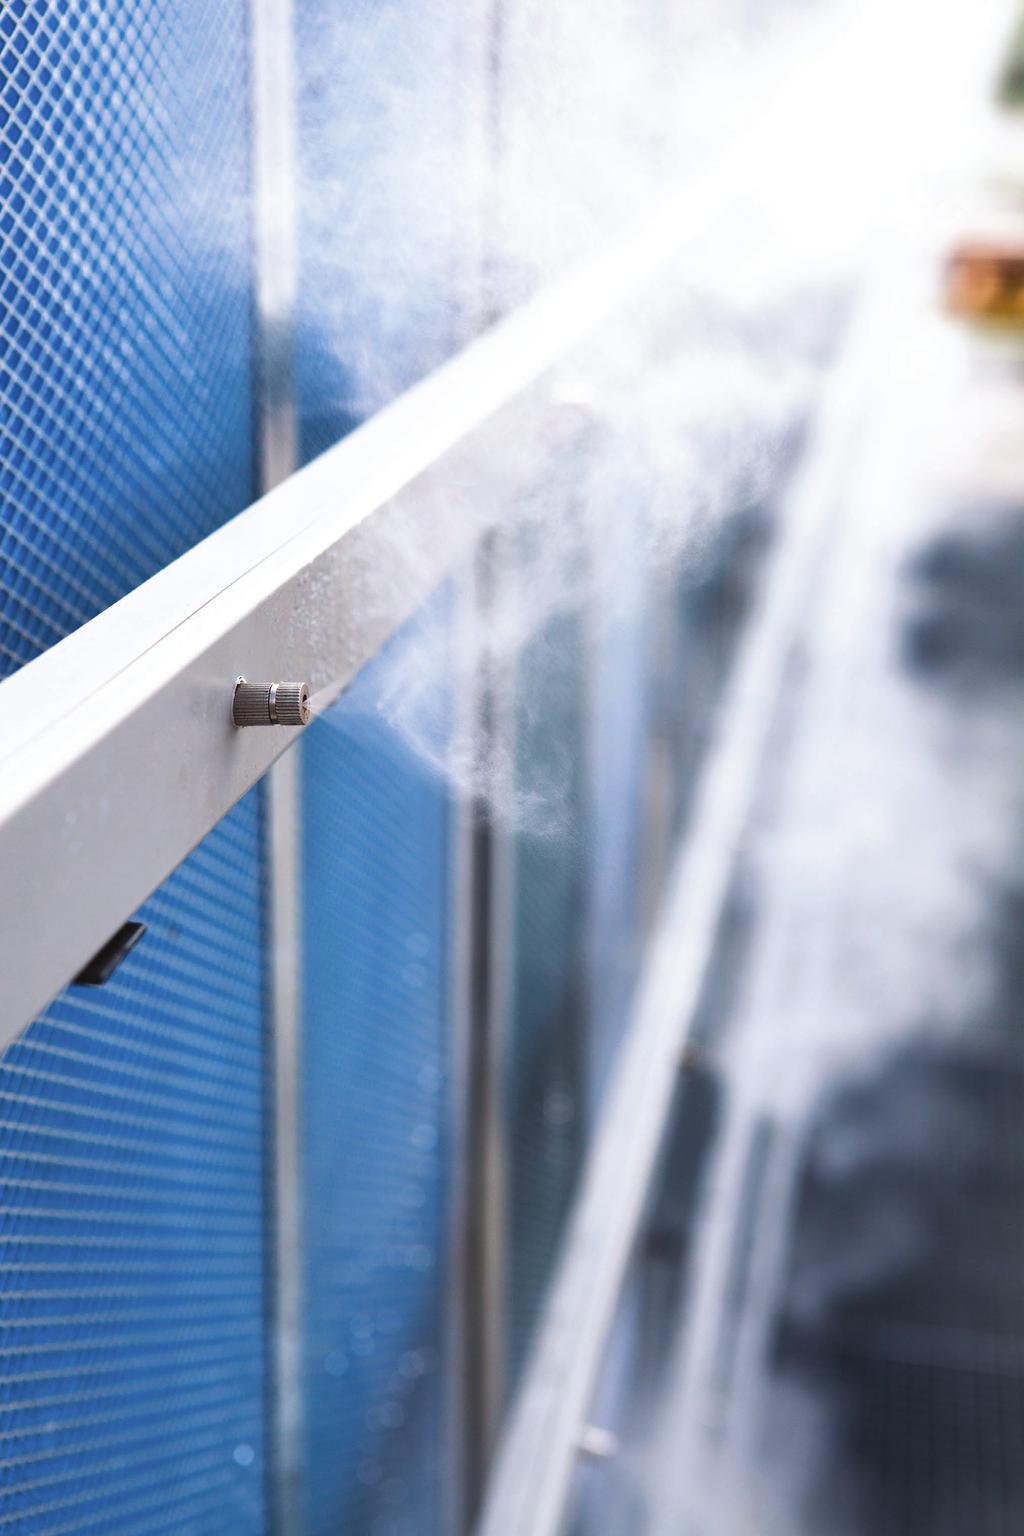 UV INCREASED DURABILITY By using the SMART COOLING adiabatic precooling panel system, the cleanness of the heat emission radiators is maintained, thus ensuring low exit temperatures and reduced